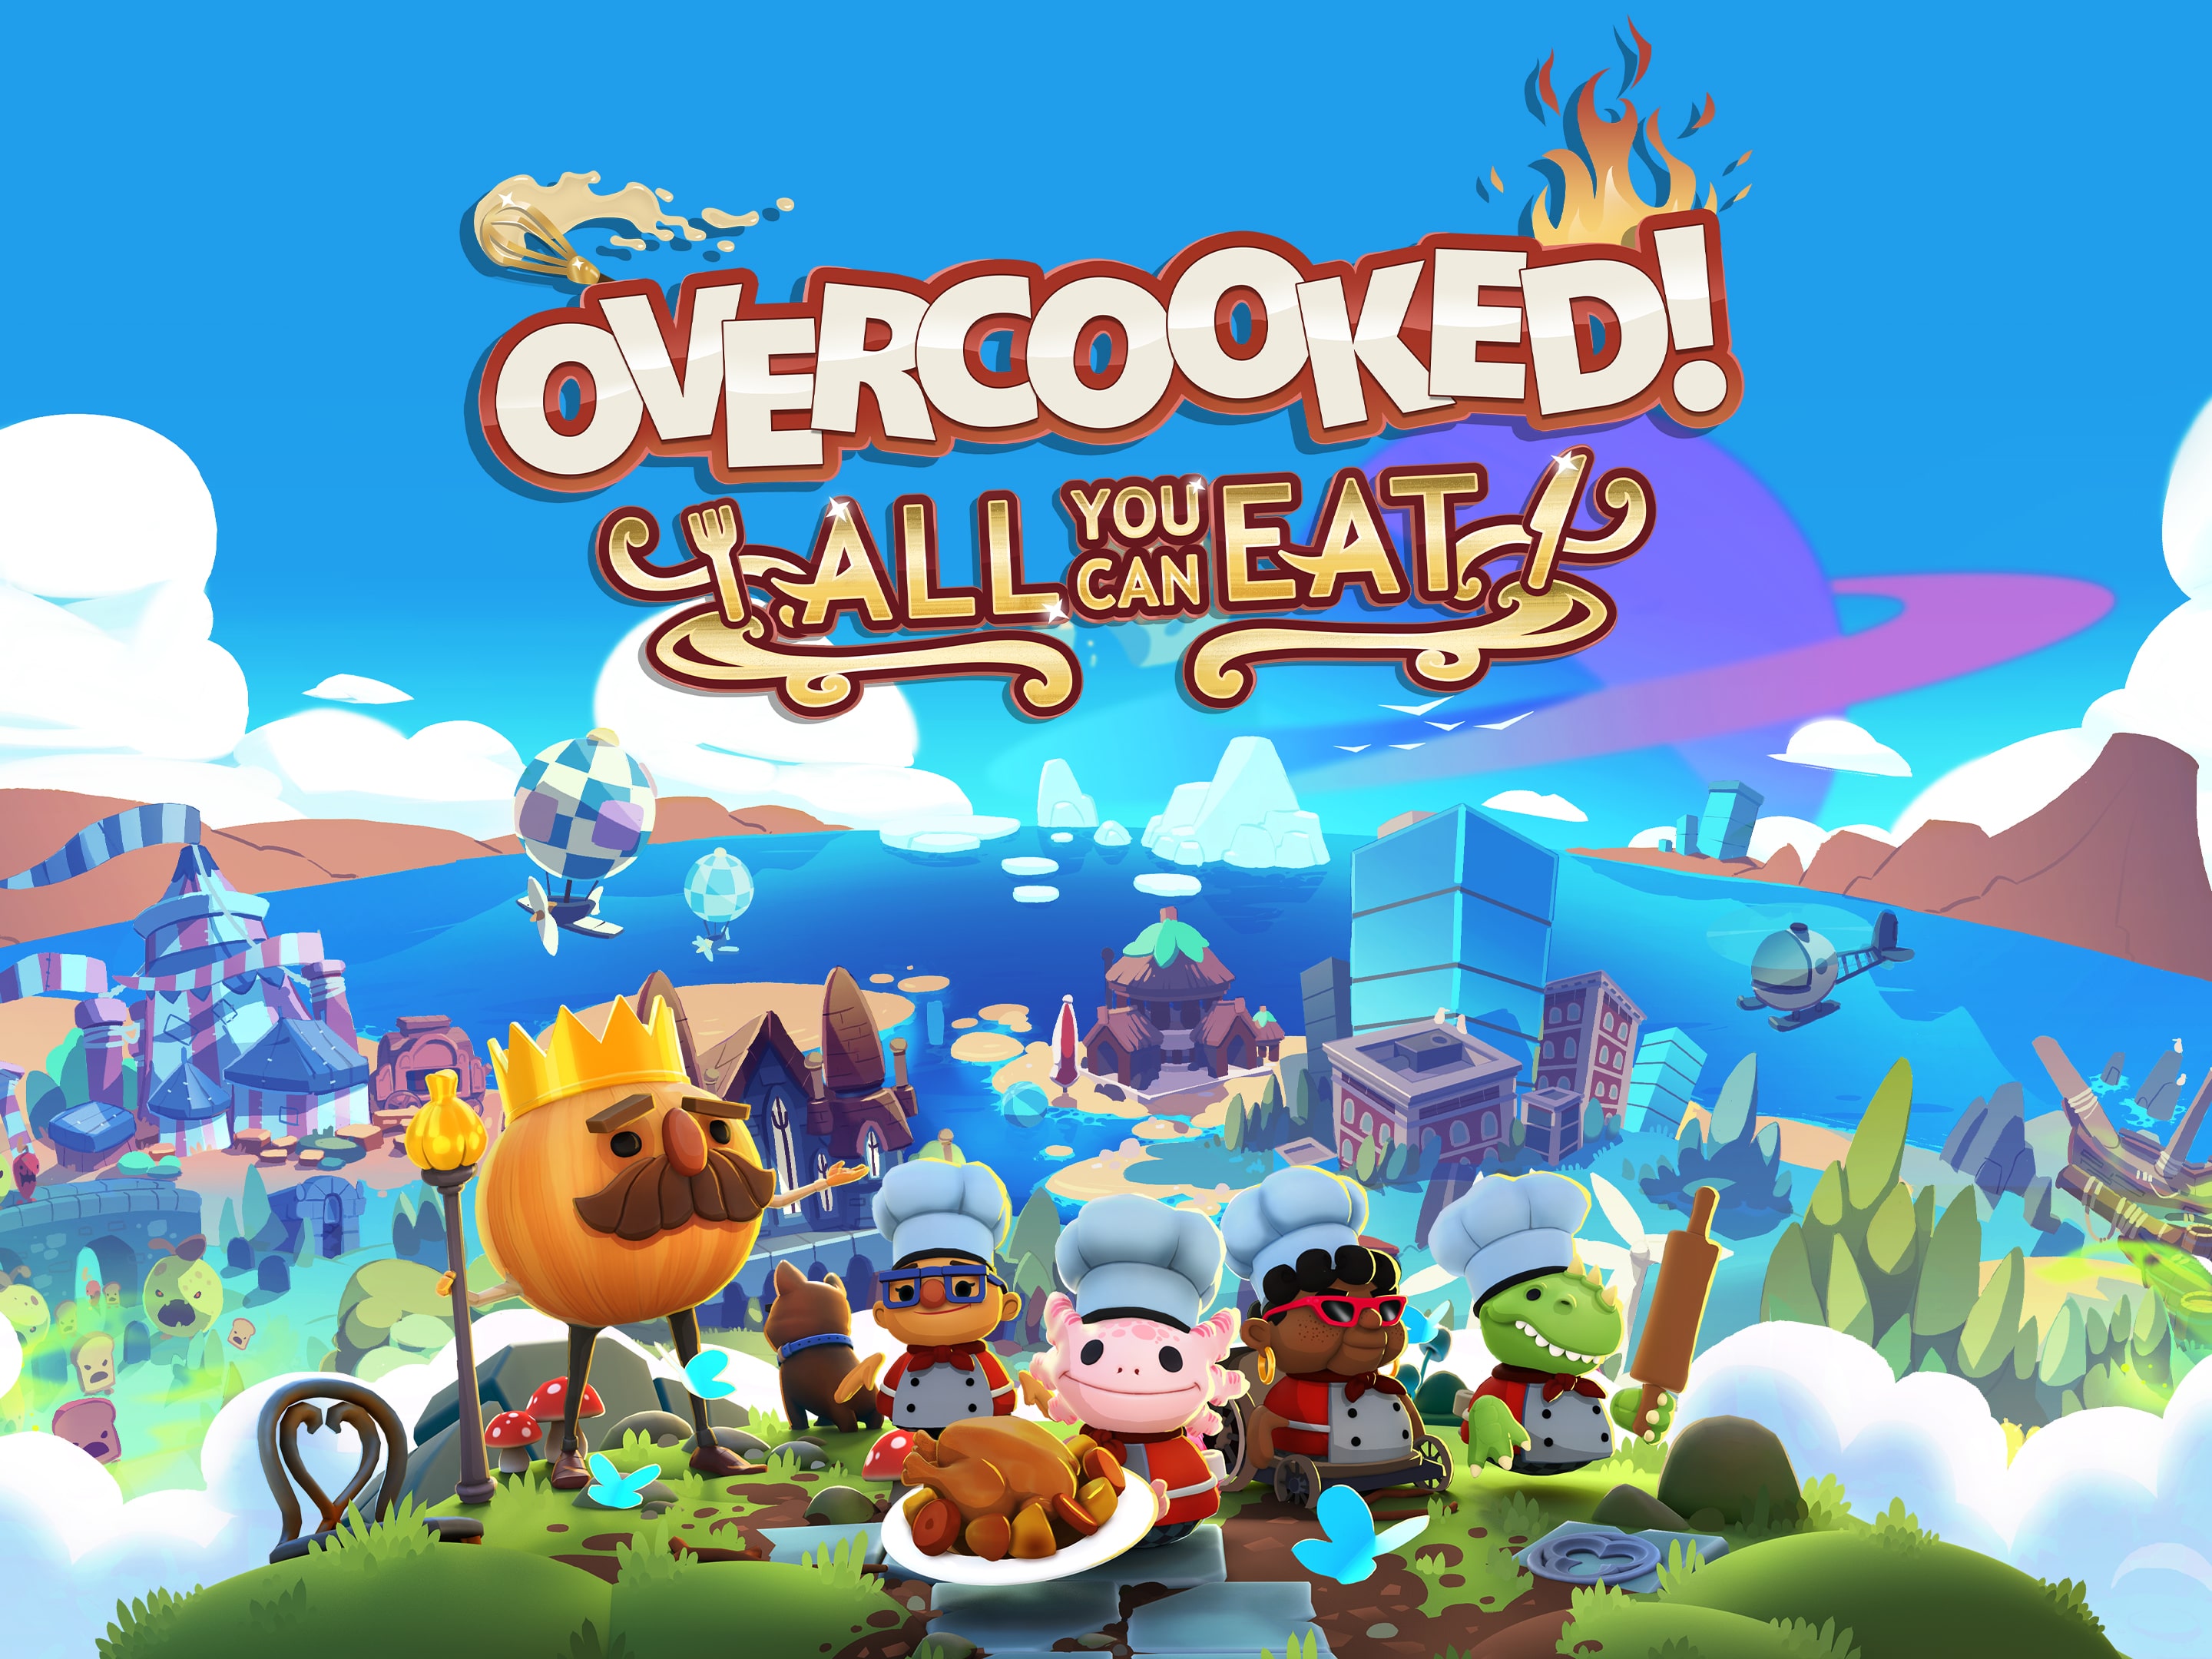 Overcooked! All You Can Eat PS5 Gameplay 